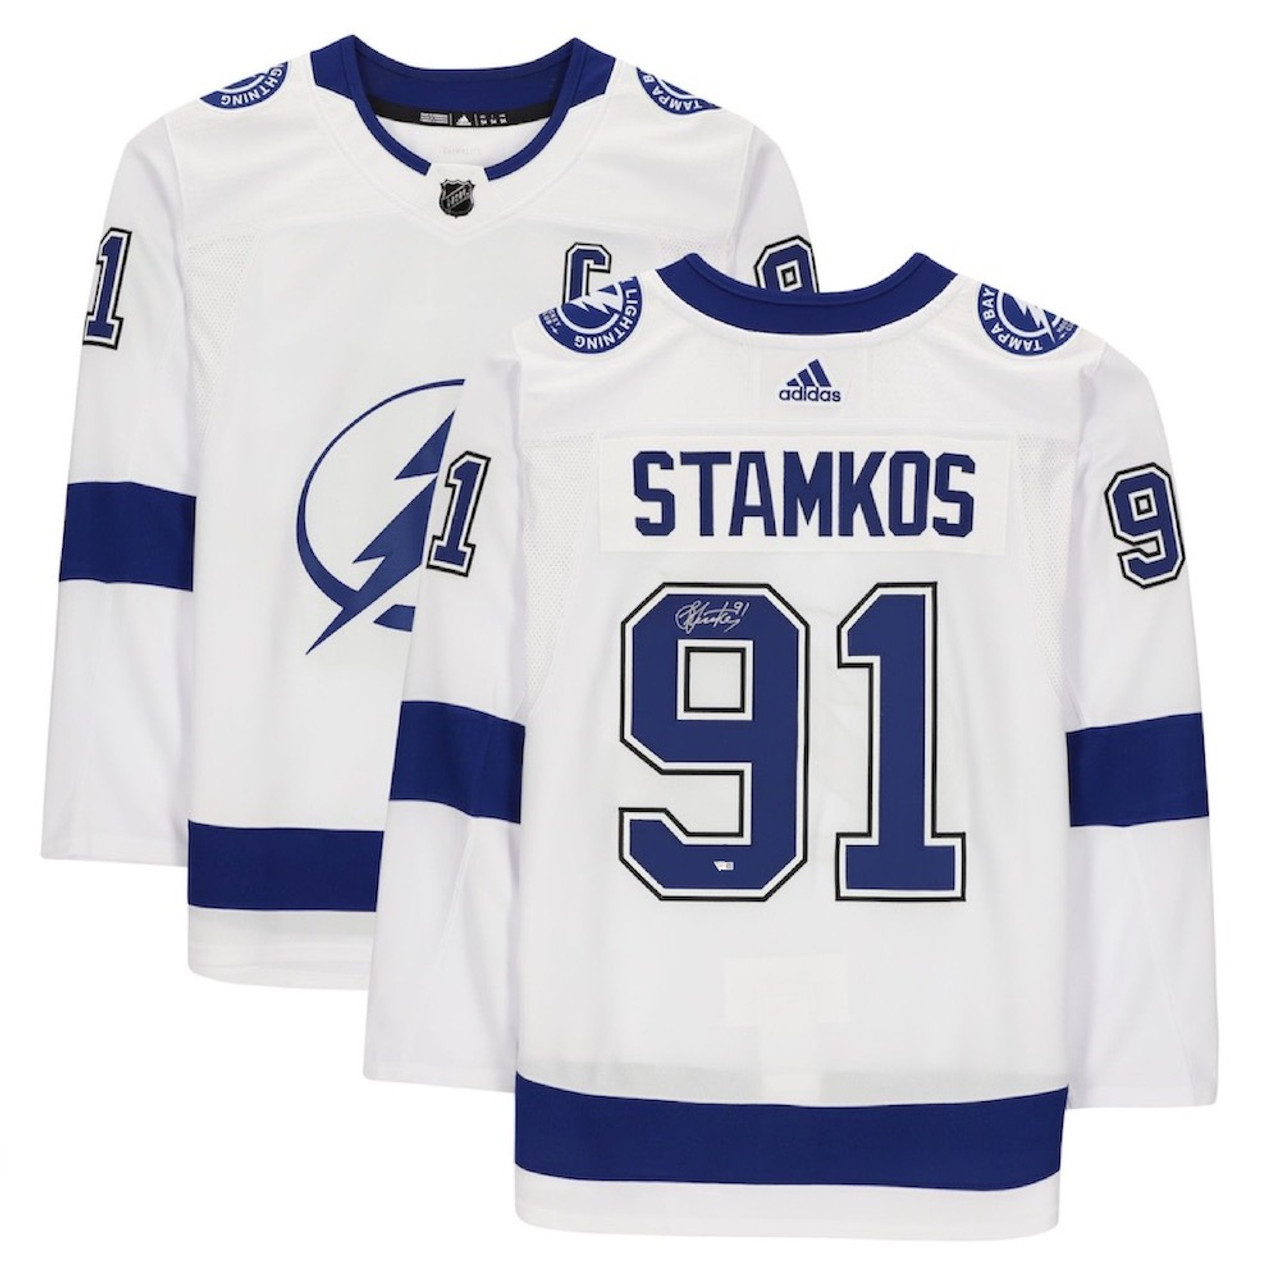 STEVEN STAMKOS Autographed Lightning Authentic Adidas White Jersey